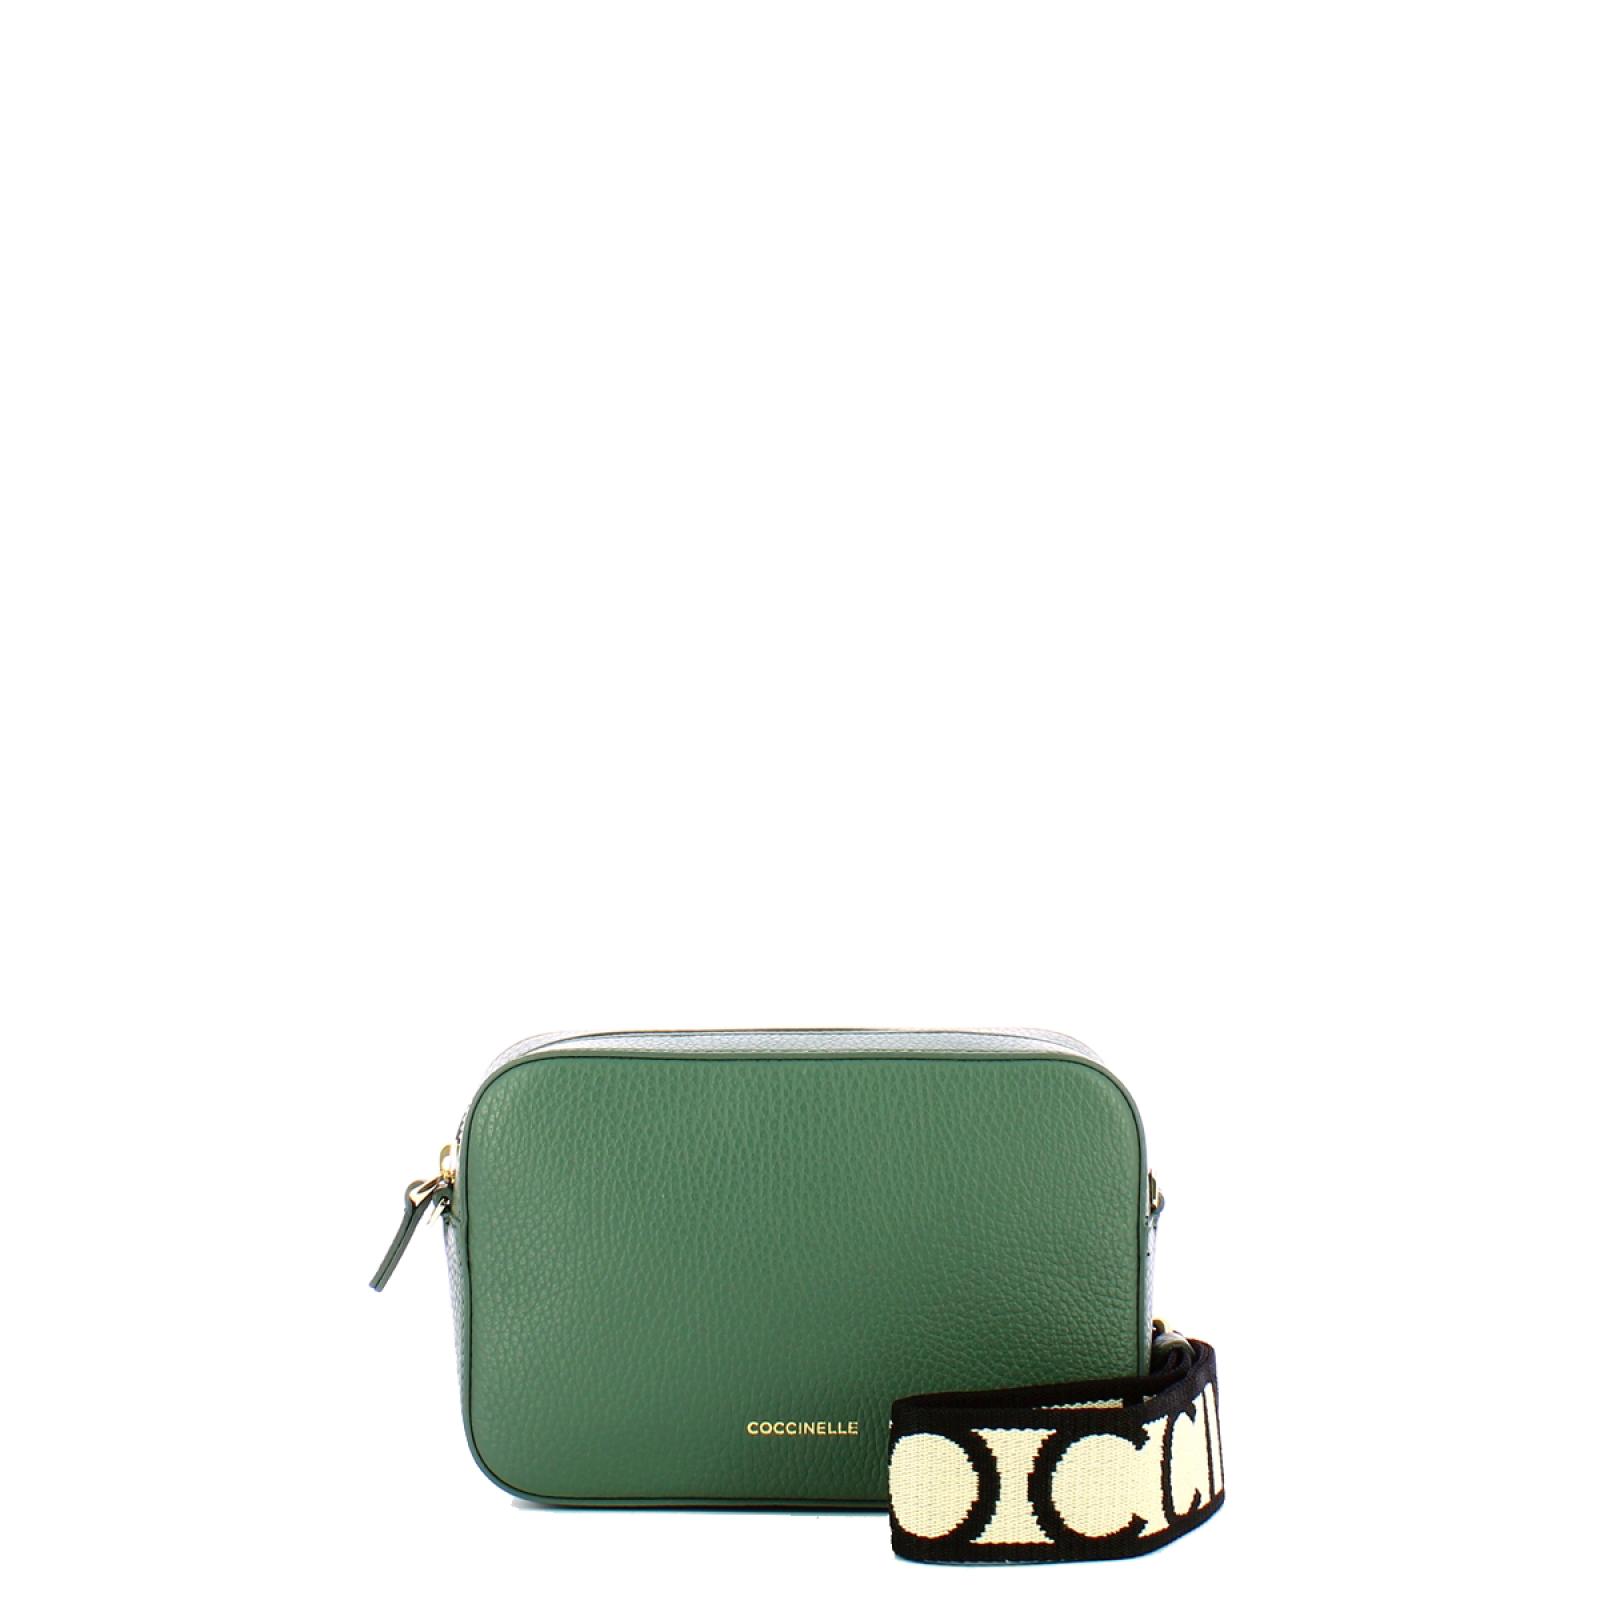 Coccinelle Minibag Tebe Kale Green - 1